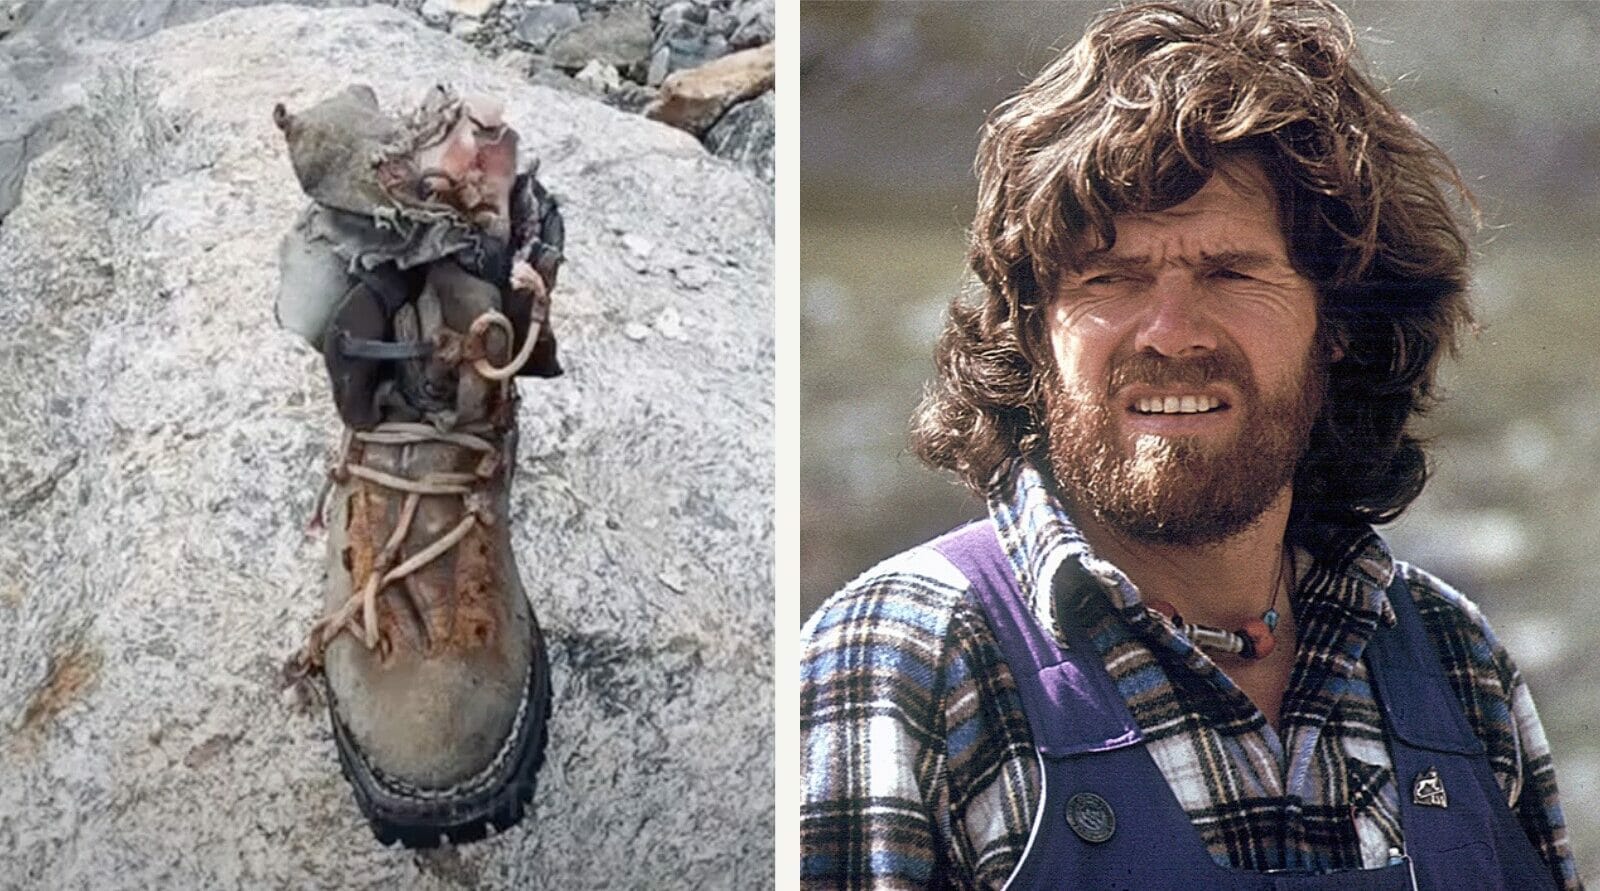 Gunther Messner Died in 1970, His Brother Reinhold Just Got His Boot